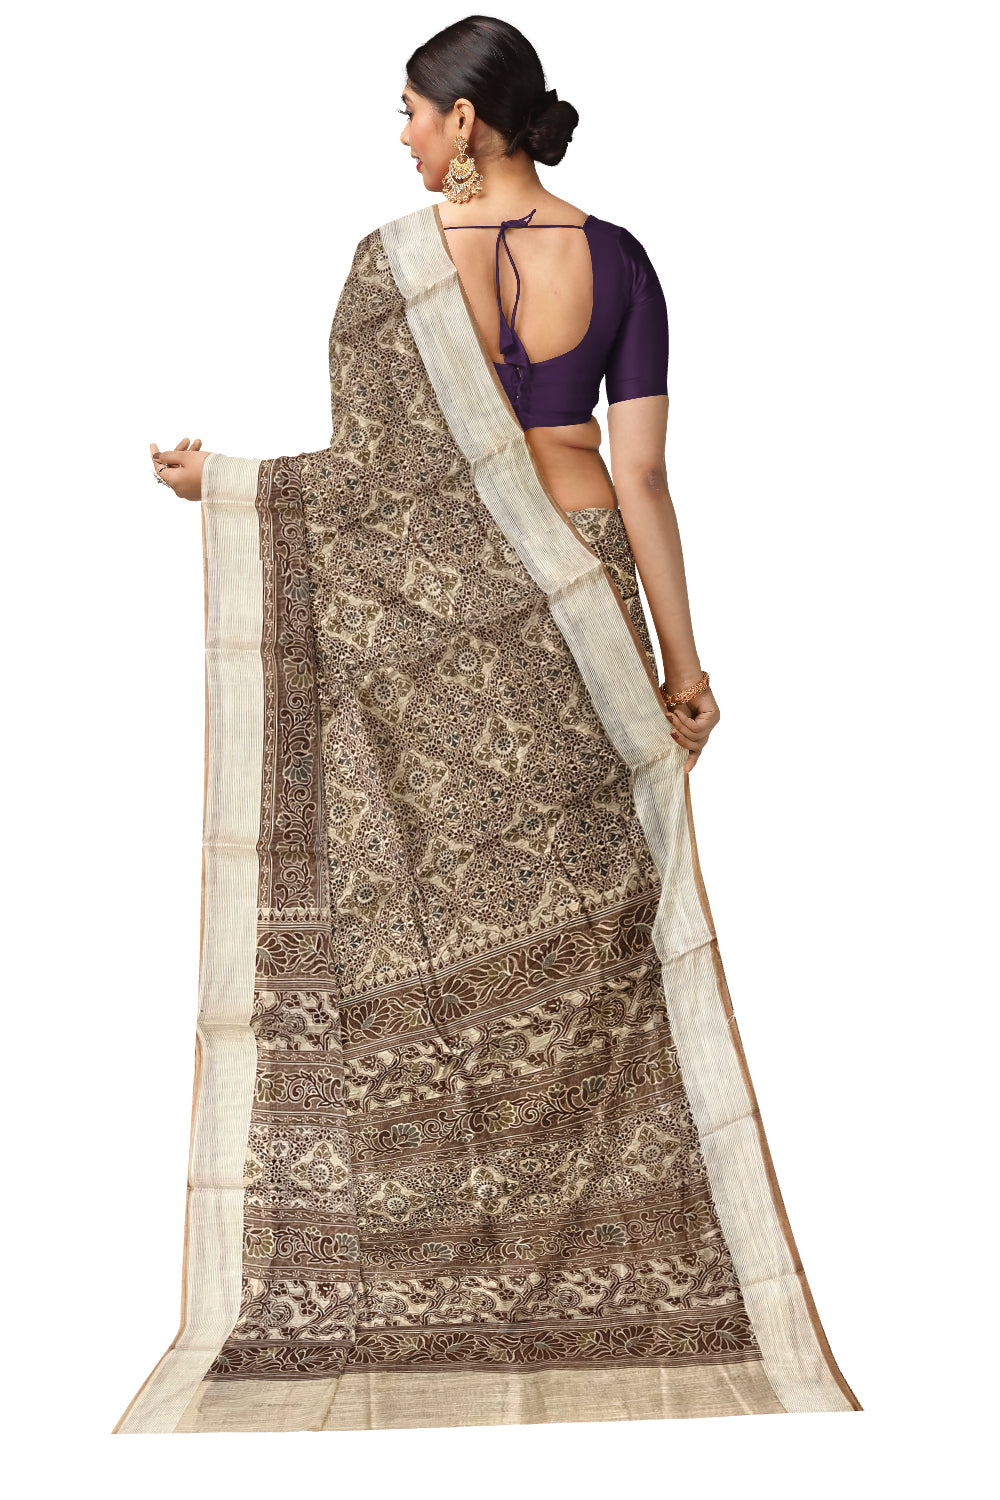 Southloom Cotton Saree with Brown Floral Woven Patterns